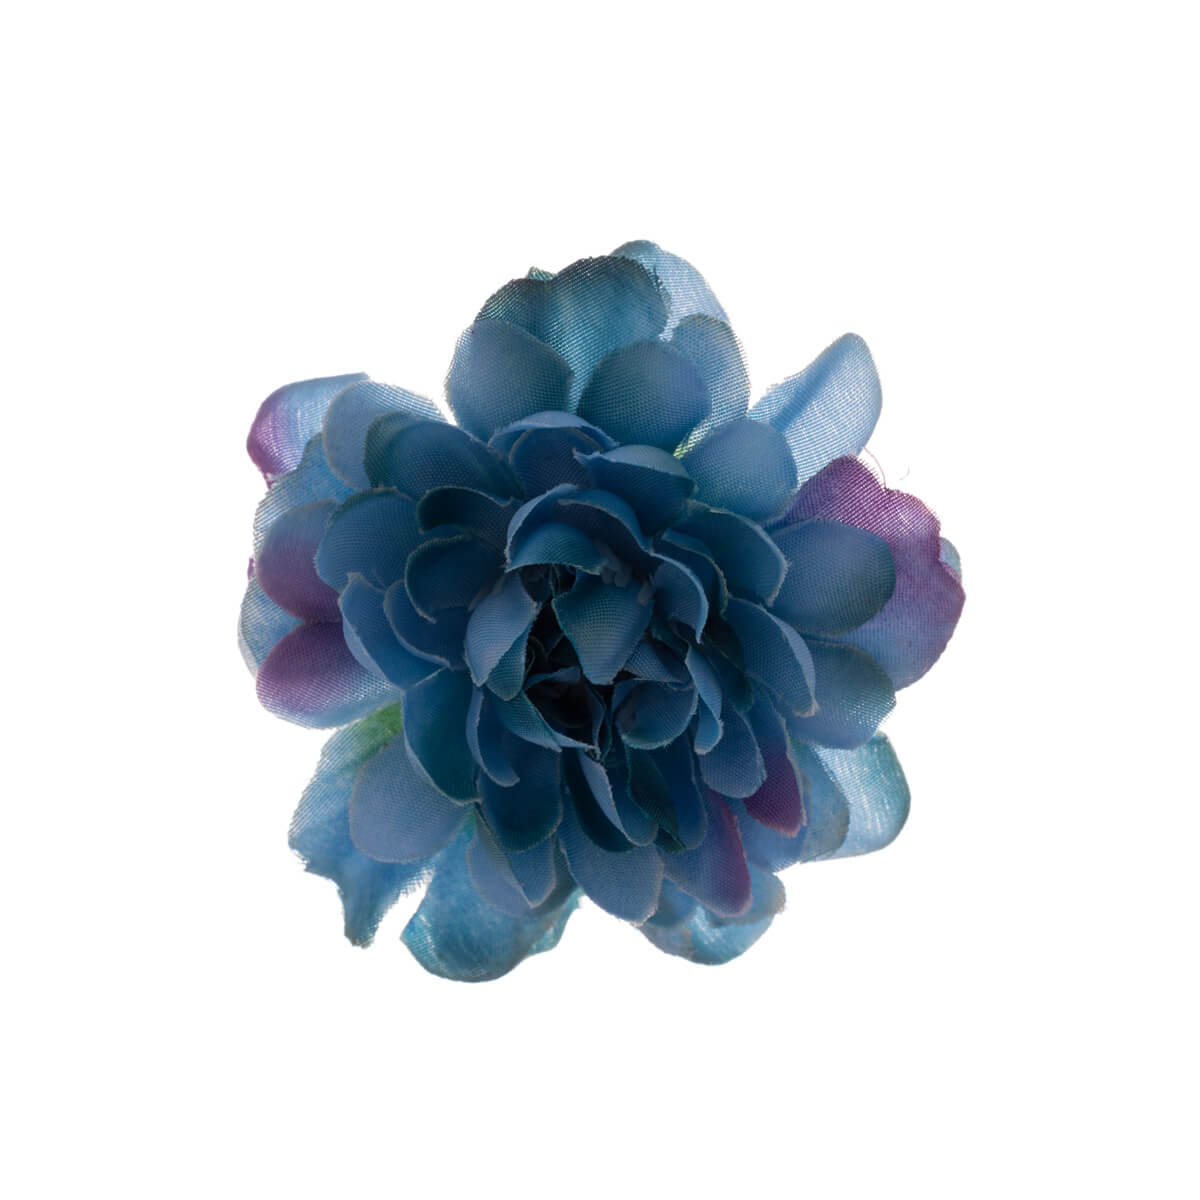 Small hair flower and costume flower 5,7cm